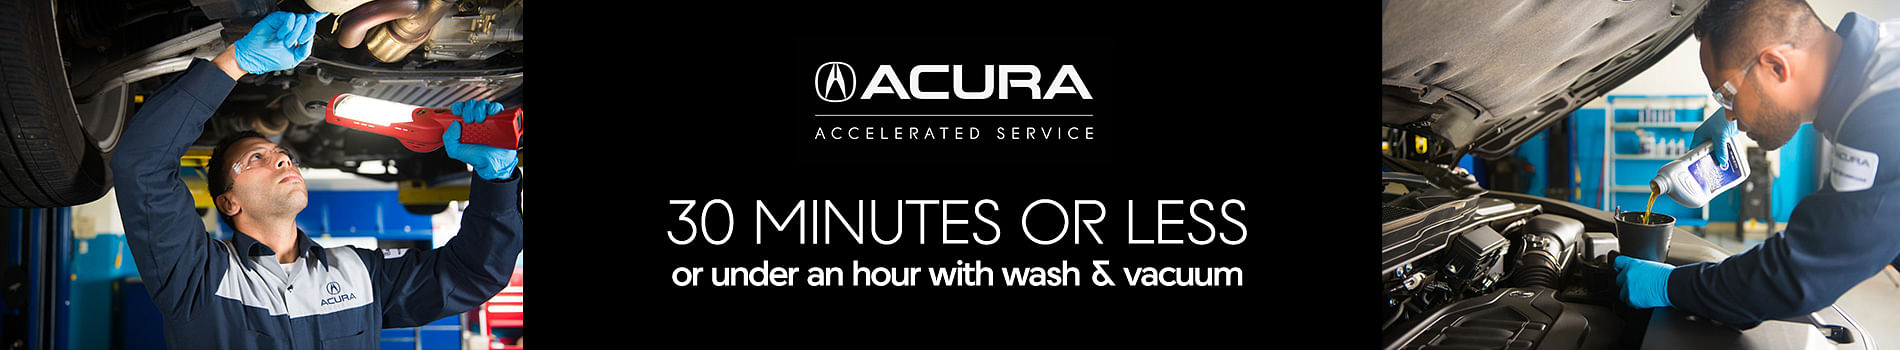 Acura accelerated service banner